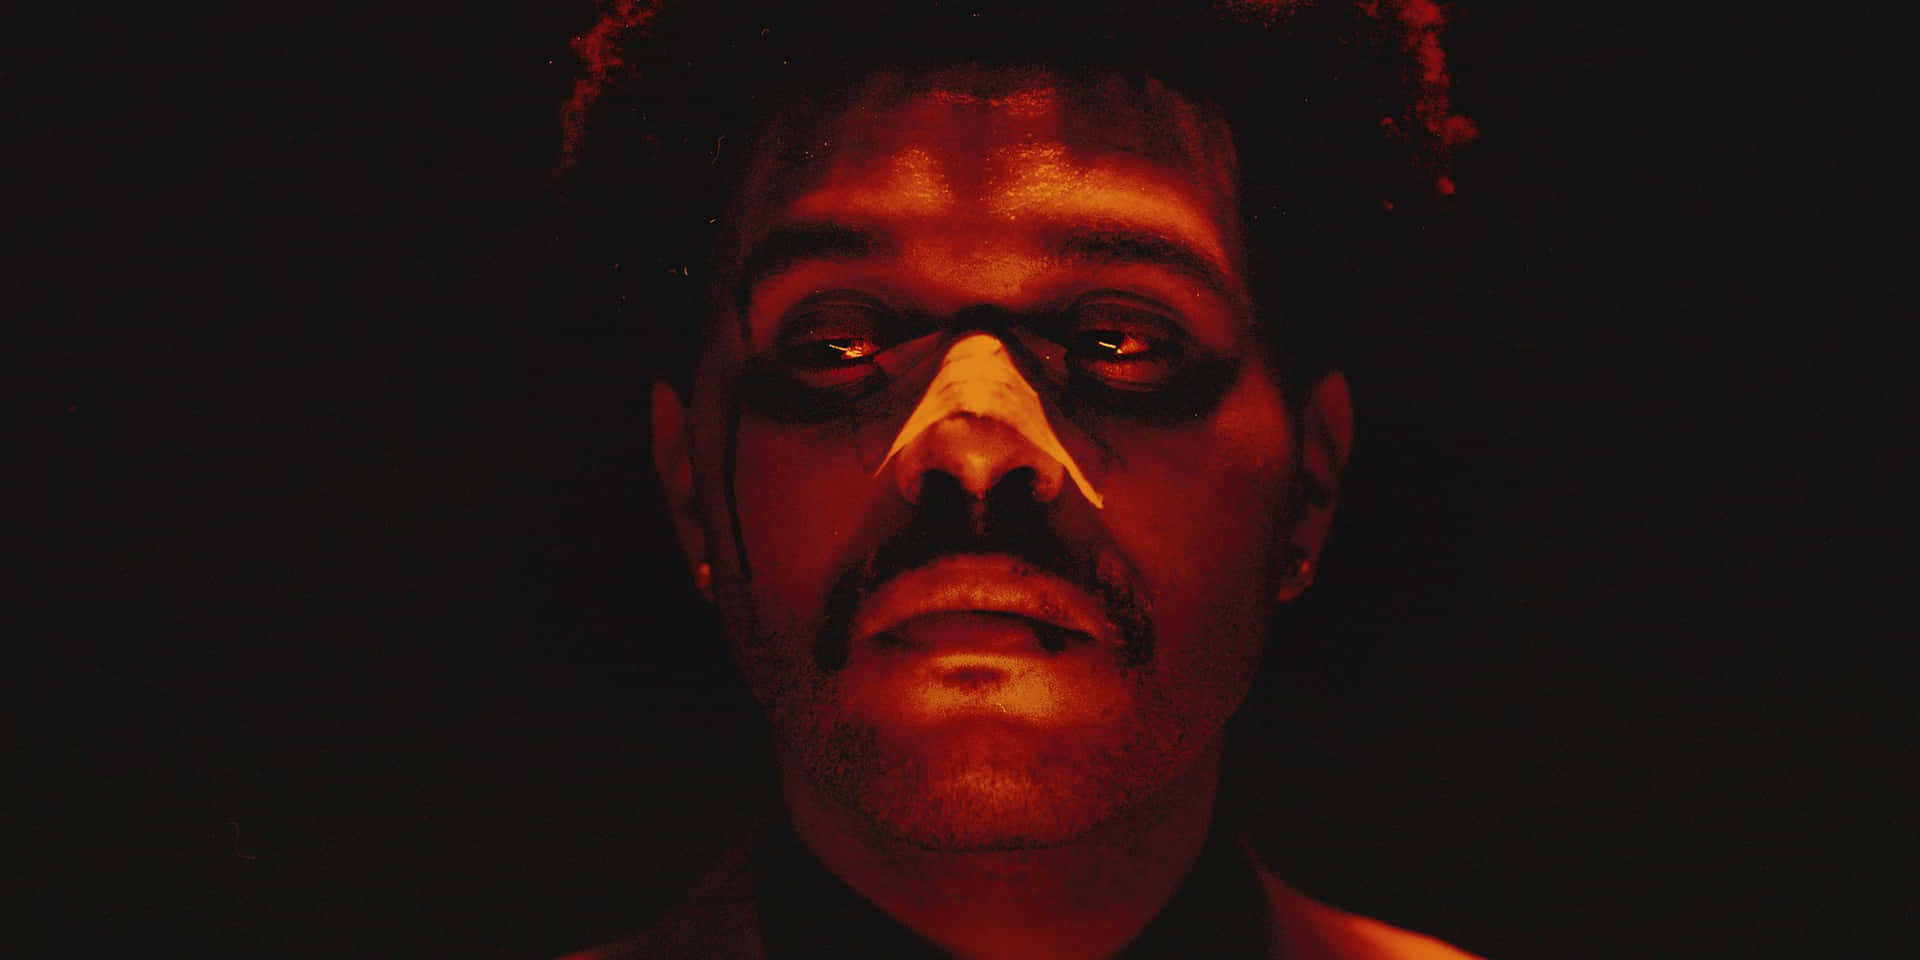 The Weeknd's After Hours album artwork featuring a bold and enigmatic portrait Wallpaper